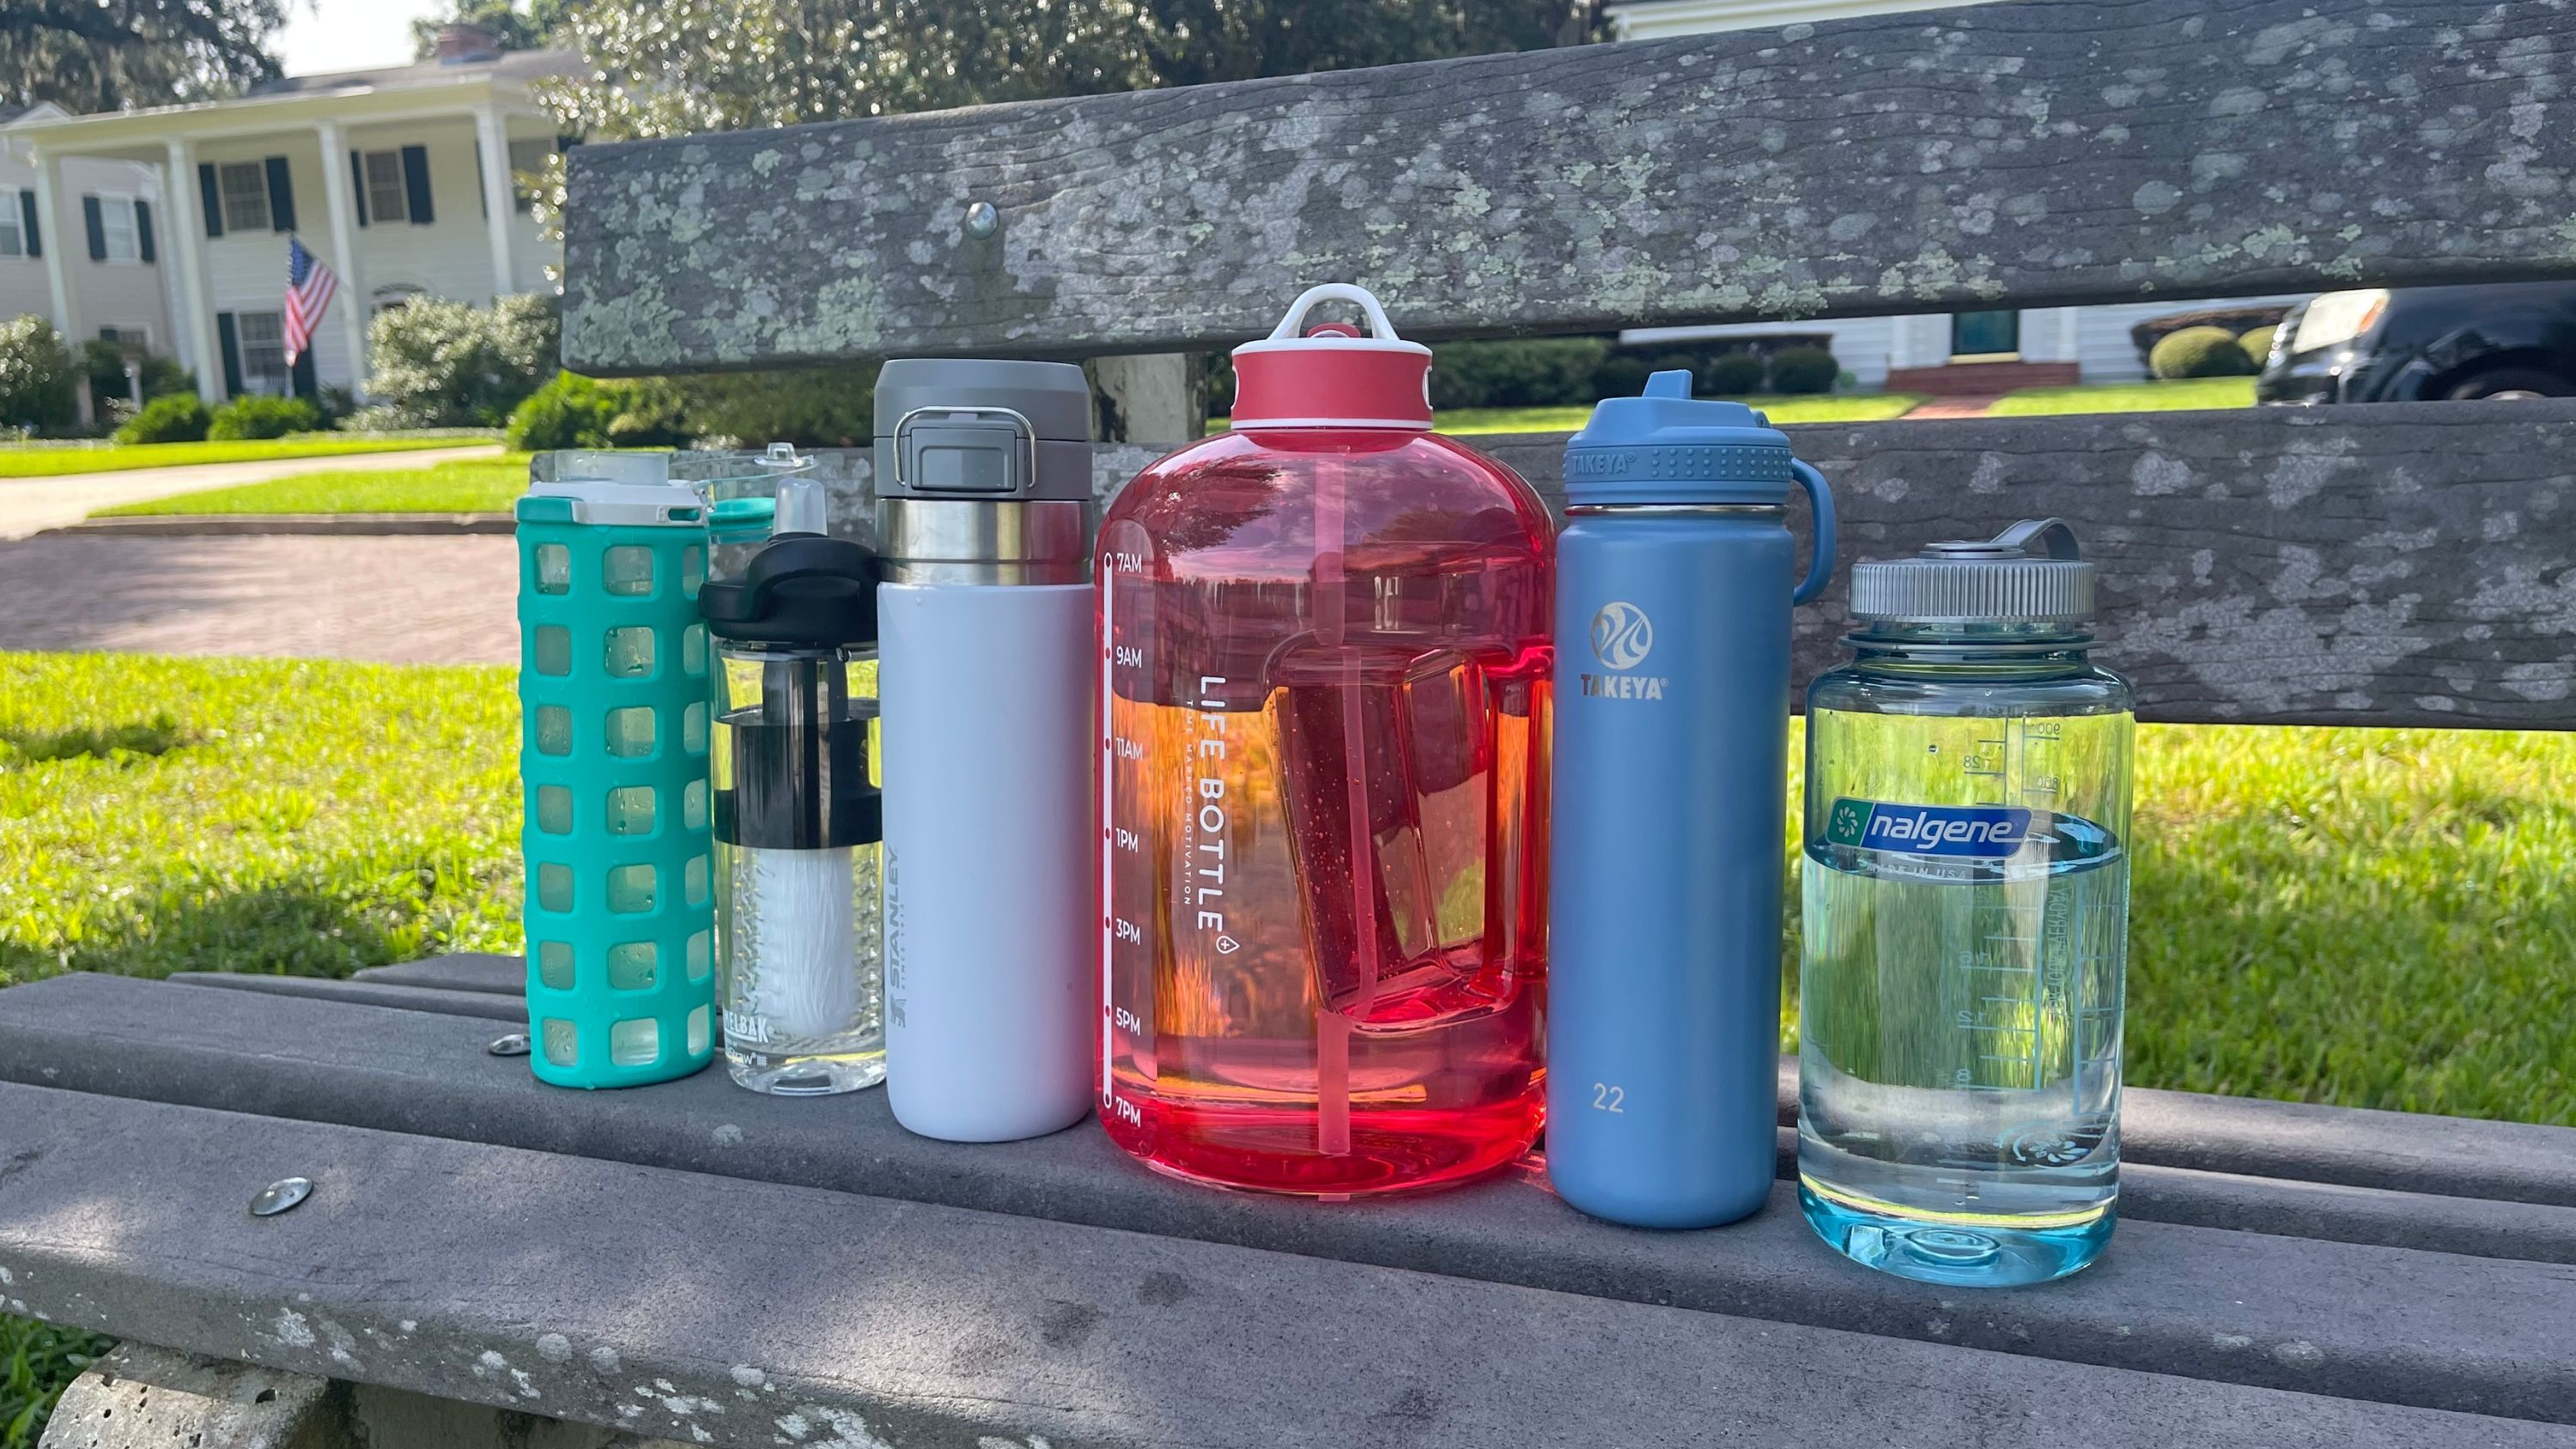 Six reusable water bottles sit on a park bench with a brick road, grass, and homes in the background